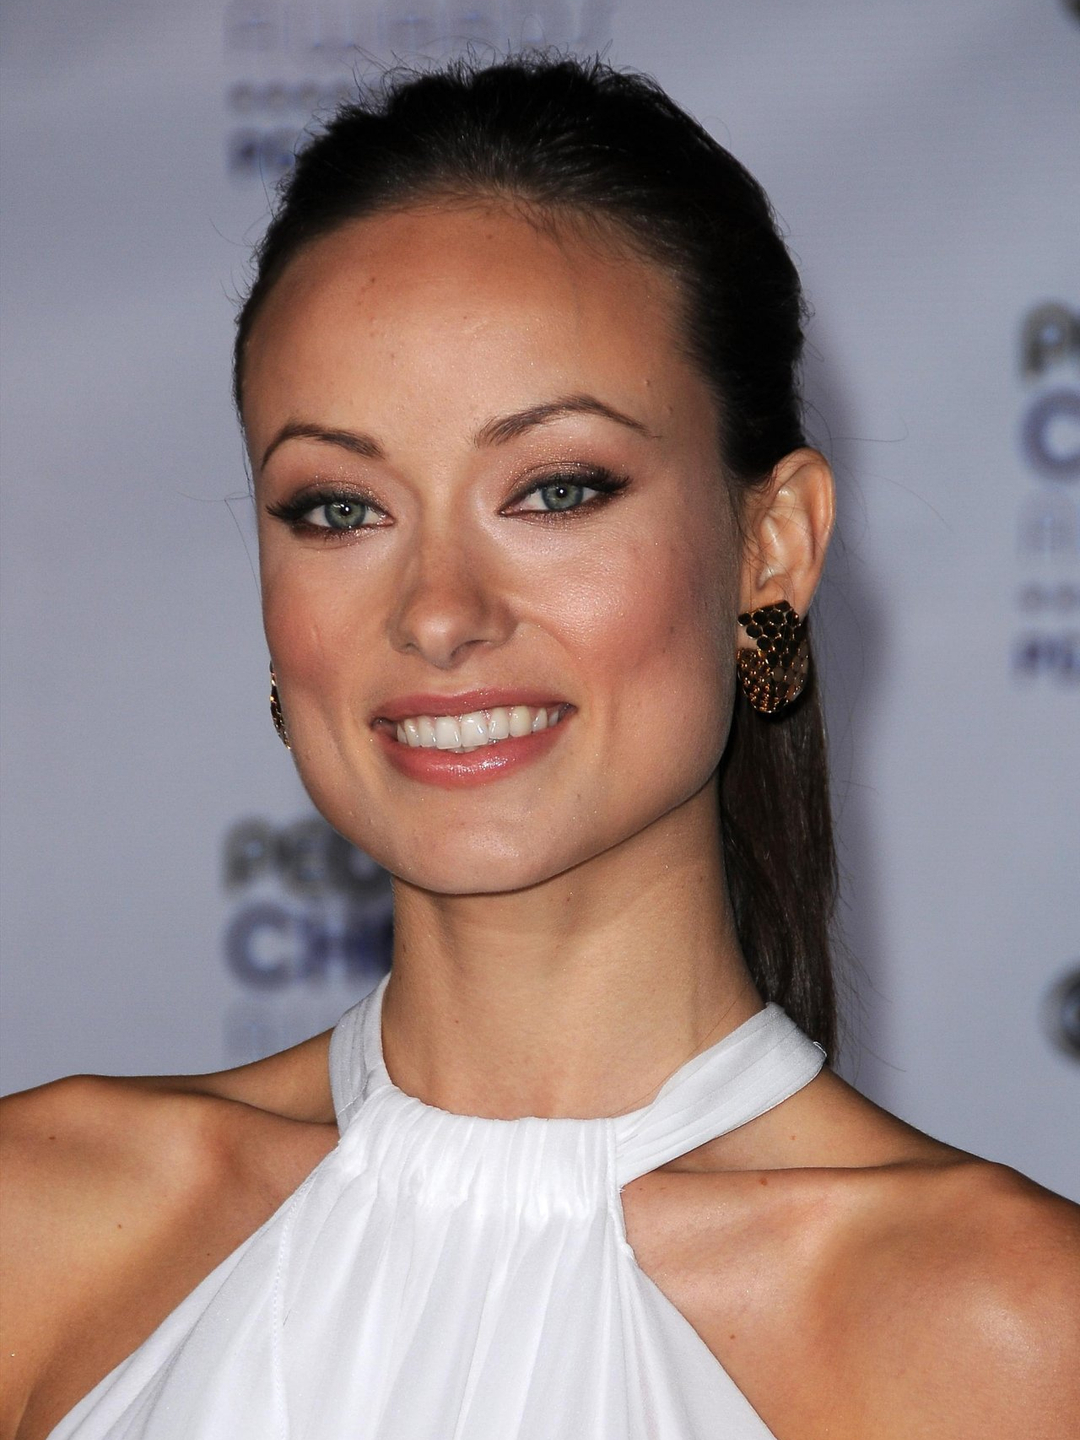 Olivia Wilde who is her mother